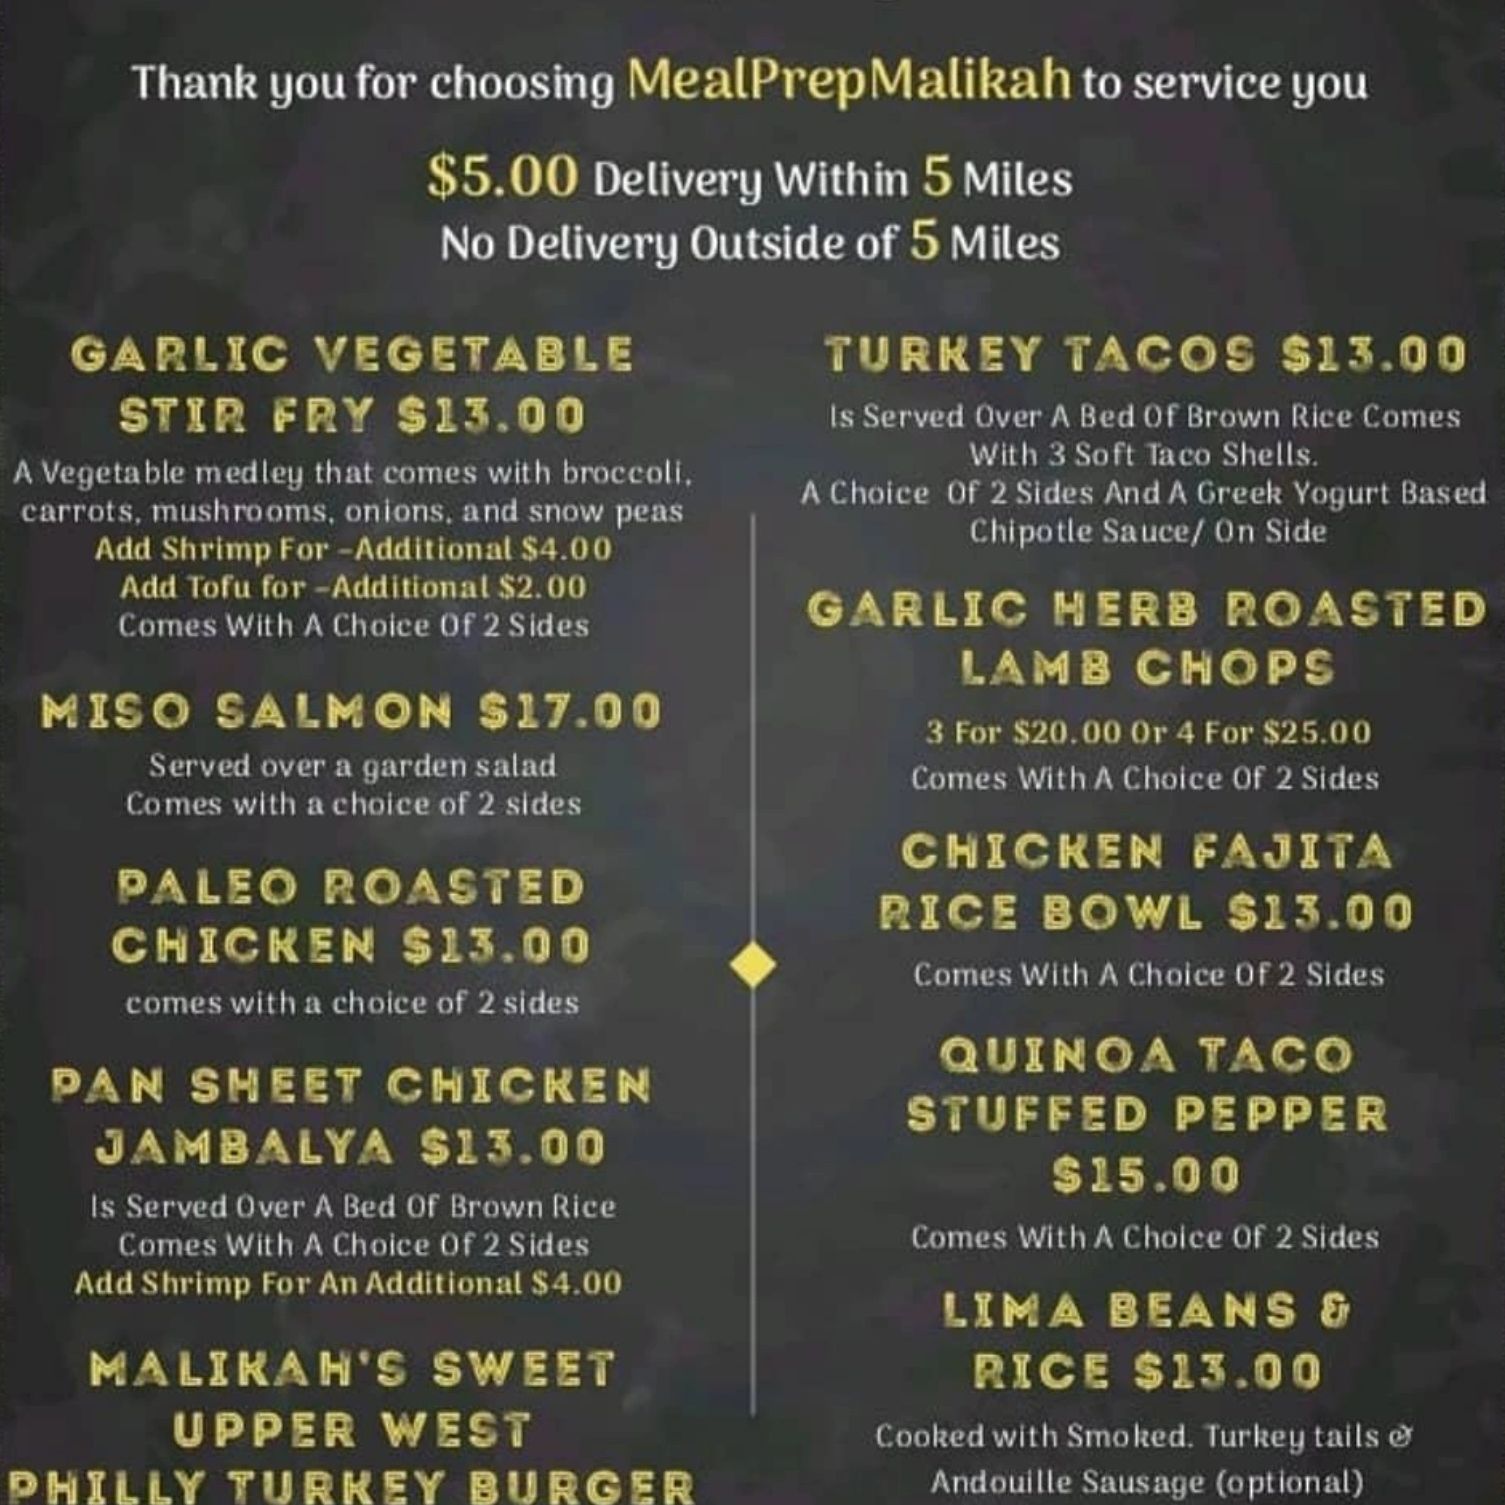 Prices and menu are subject to change